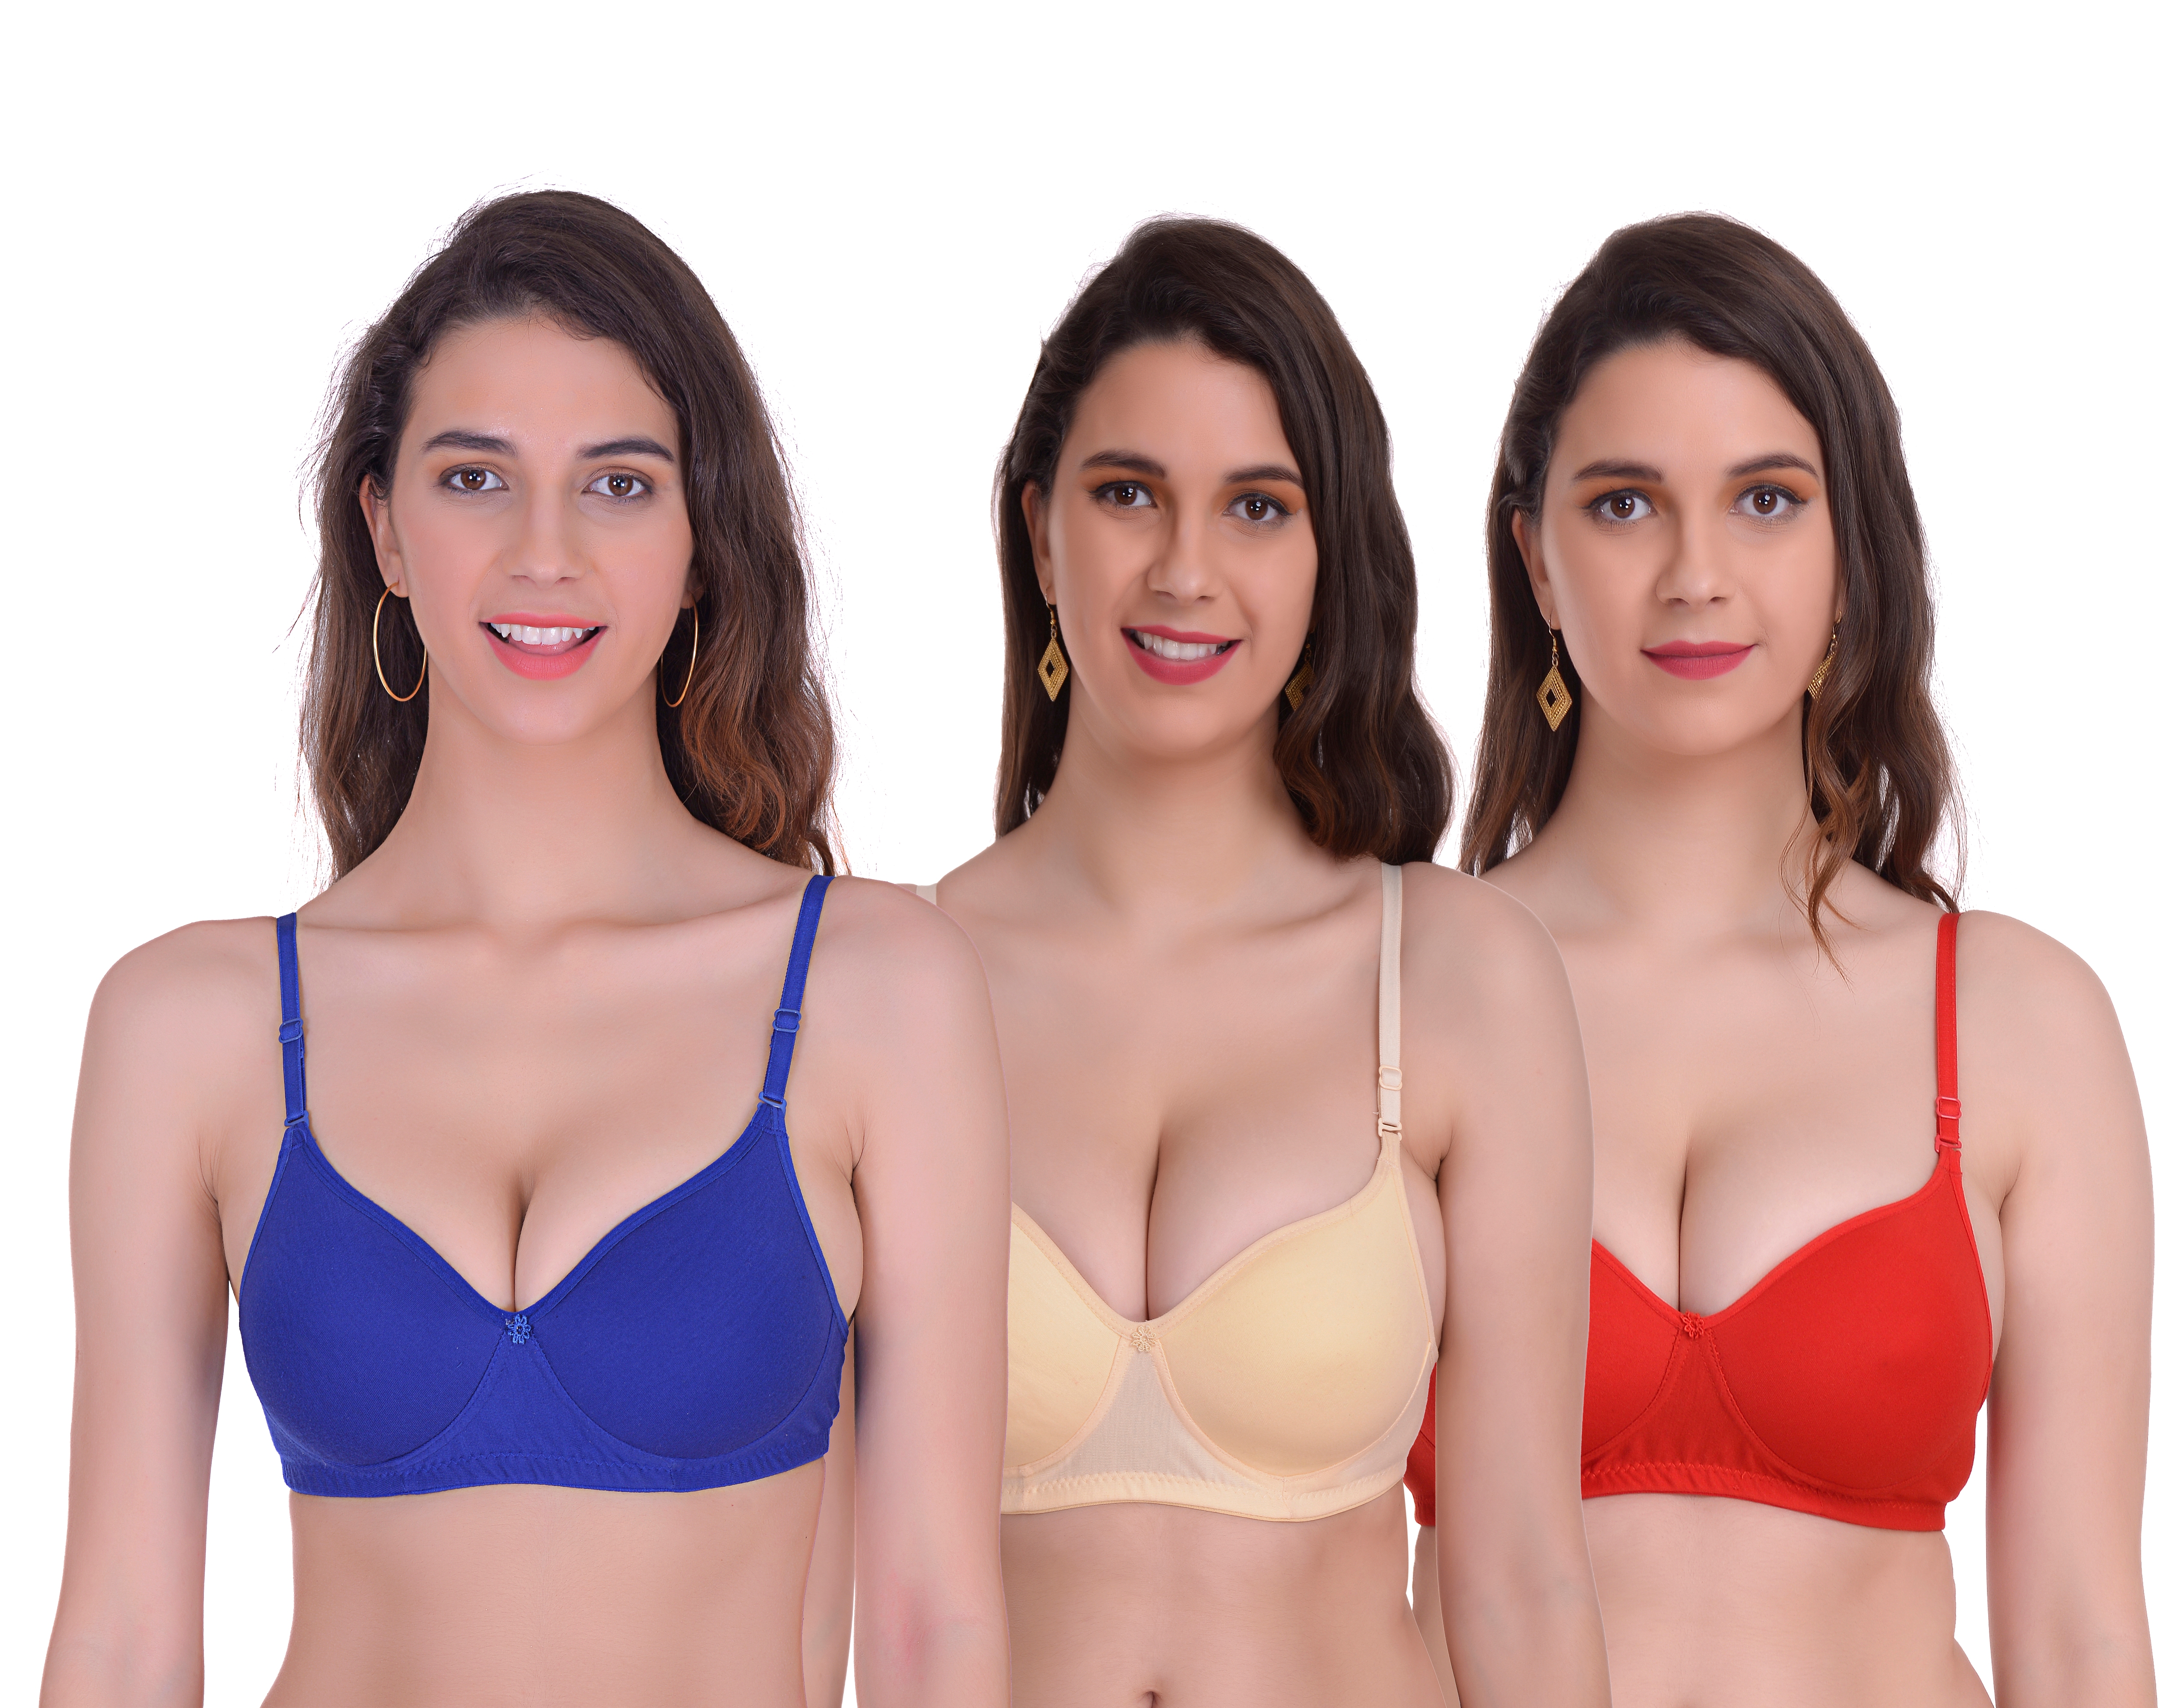 Mynte Women's Cotton Rich Lightly Padded Non-Wired Full Cup Regular Bra (Pack of 3) (Blue/Yellow/Red,30) (MY-CPPB-7BLYR-30)